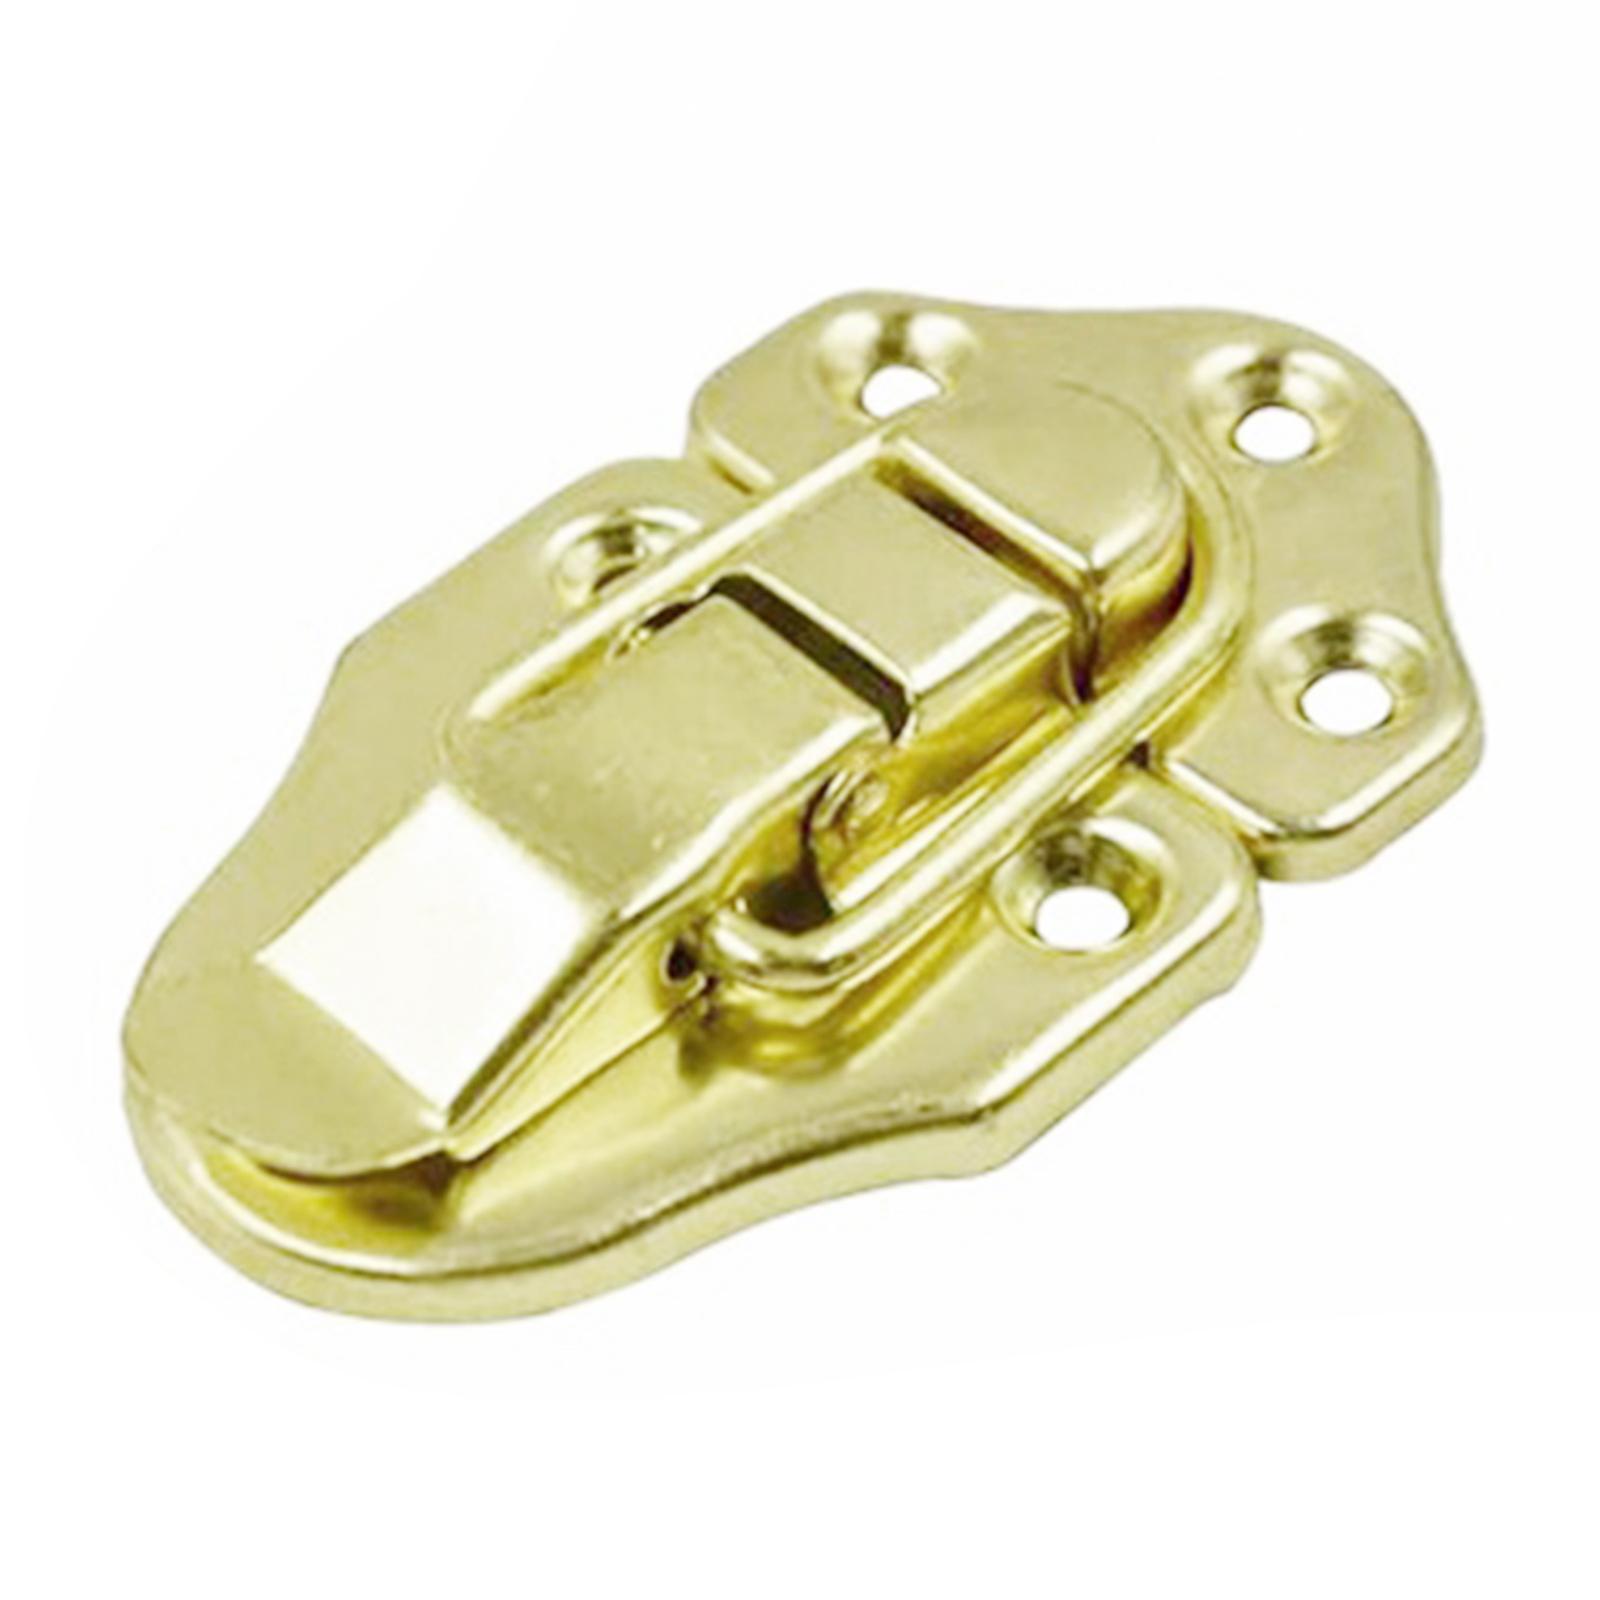 Toggle Latch Wooden Box Latch Clasp Clip for Jewelry Trinket Box Suitcase Golden